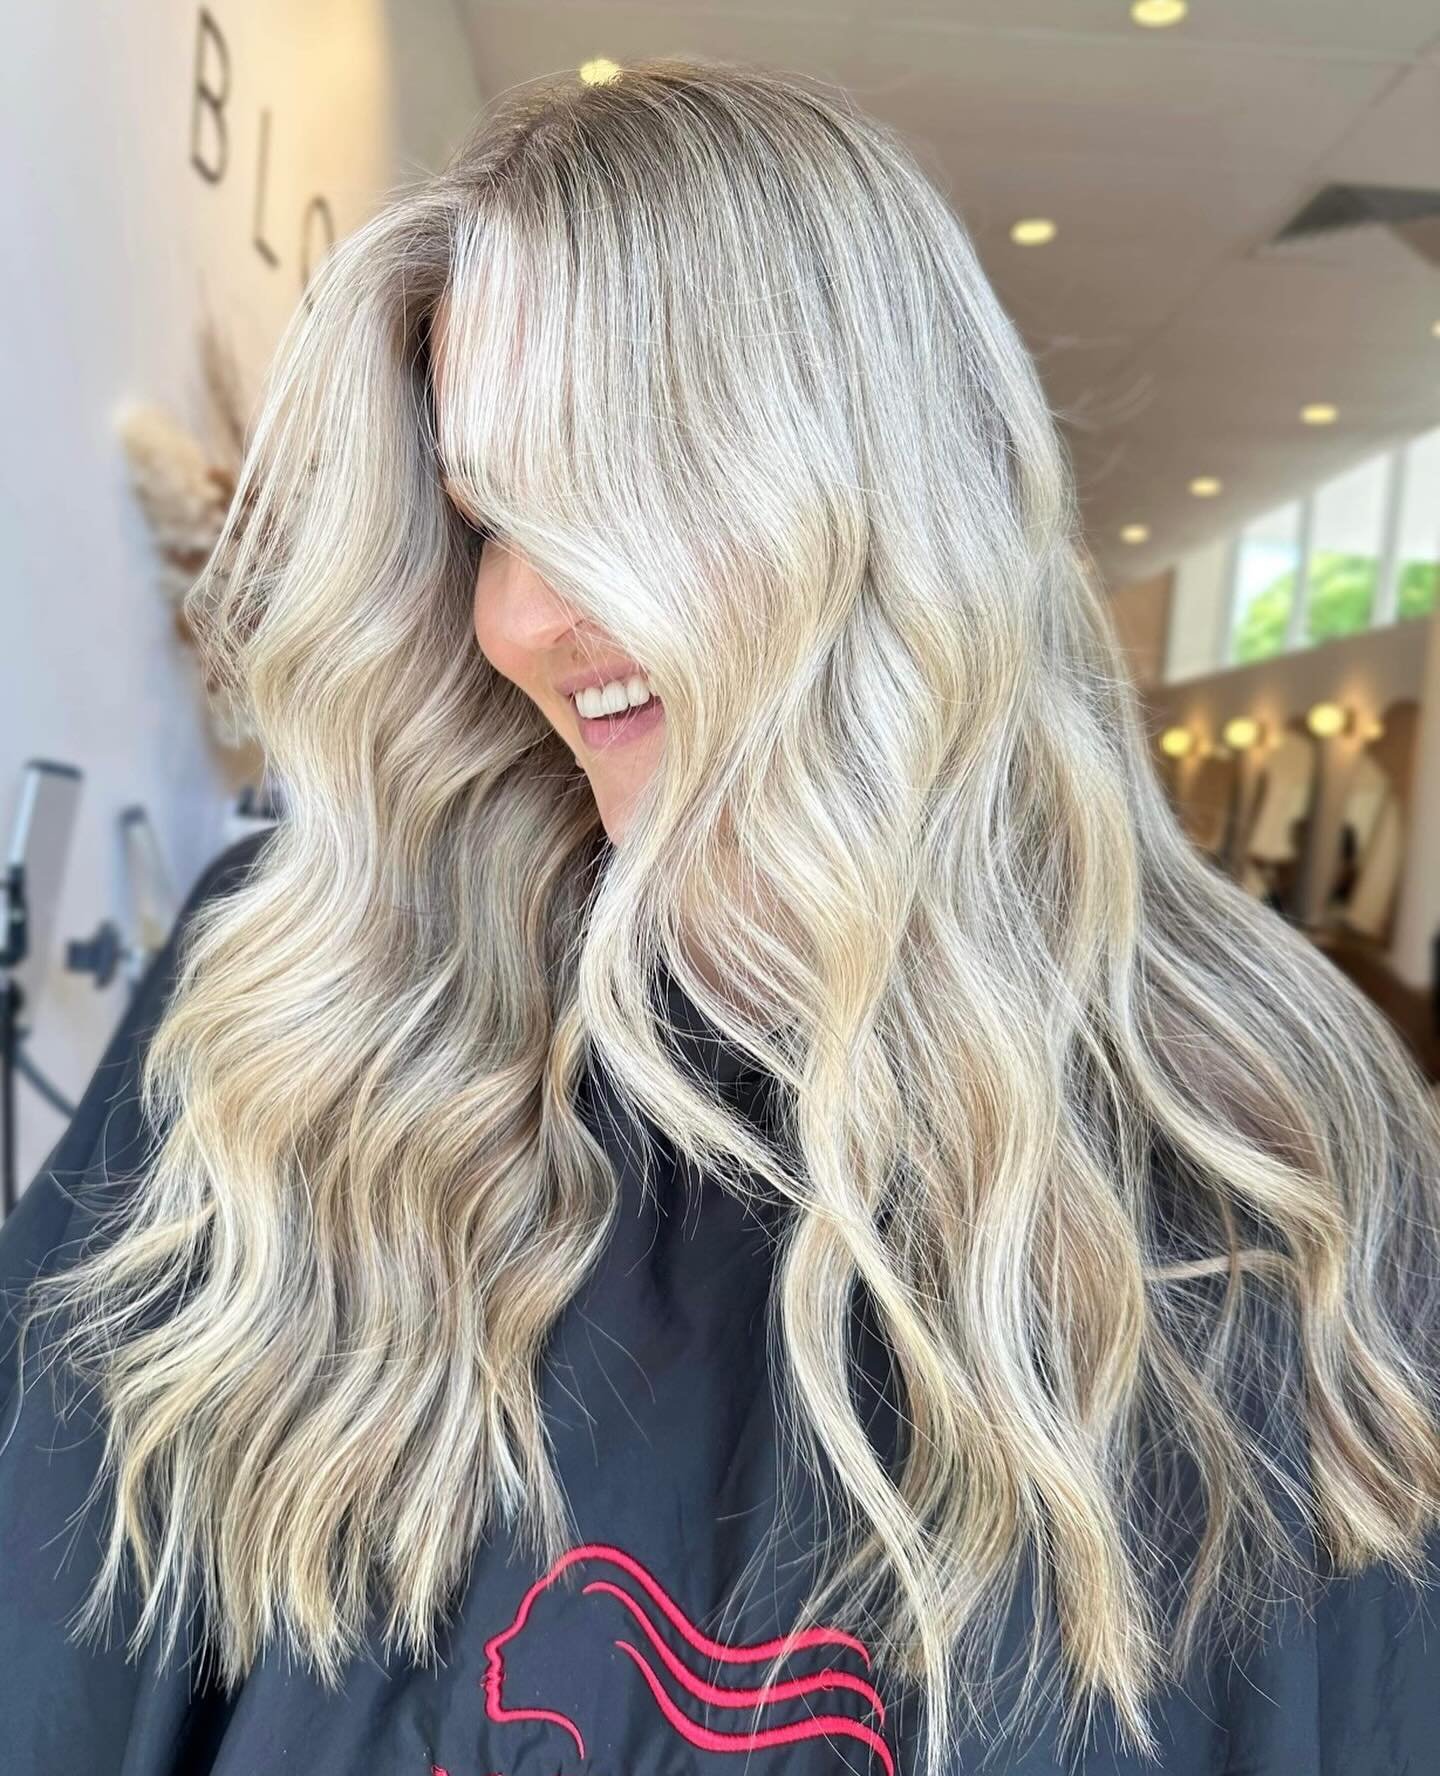 DREAMY LIVED IN BLONDE 🤍 All of our favourites in one look 〰️ soft grow out, bright ends and low maintenance! 

#WellaProANZ #AskForWella #WellaSalon  #brisbanesalon #brisbanehairstylist #blondehair #wellahair #brightblonde #icyblonde #cooltonedblon